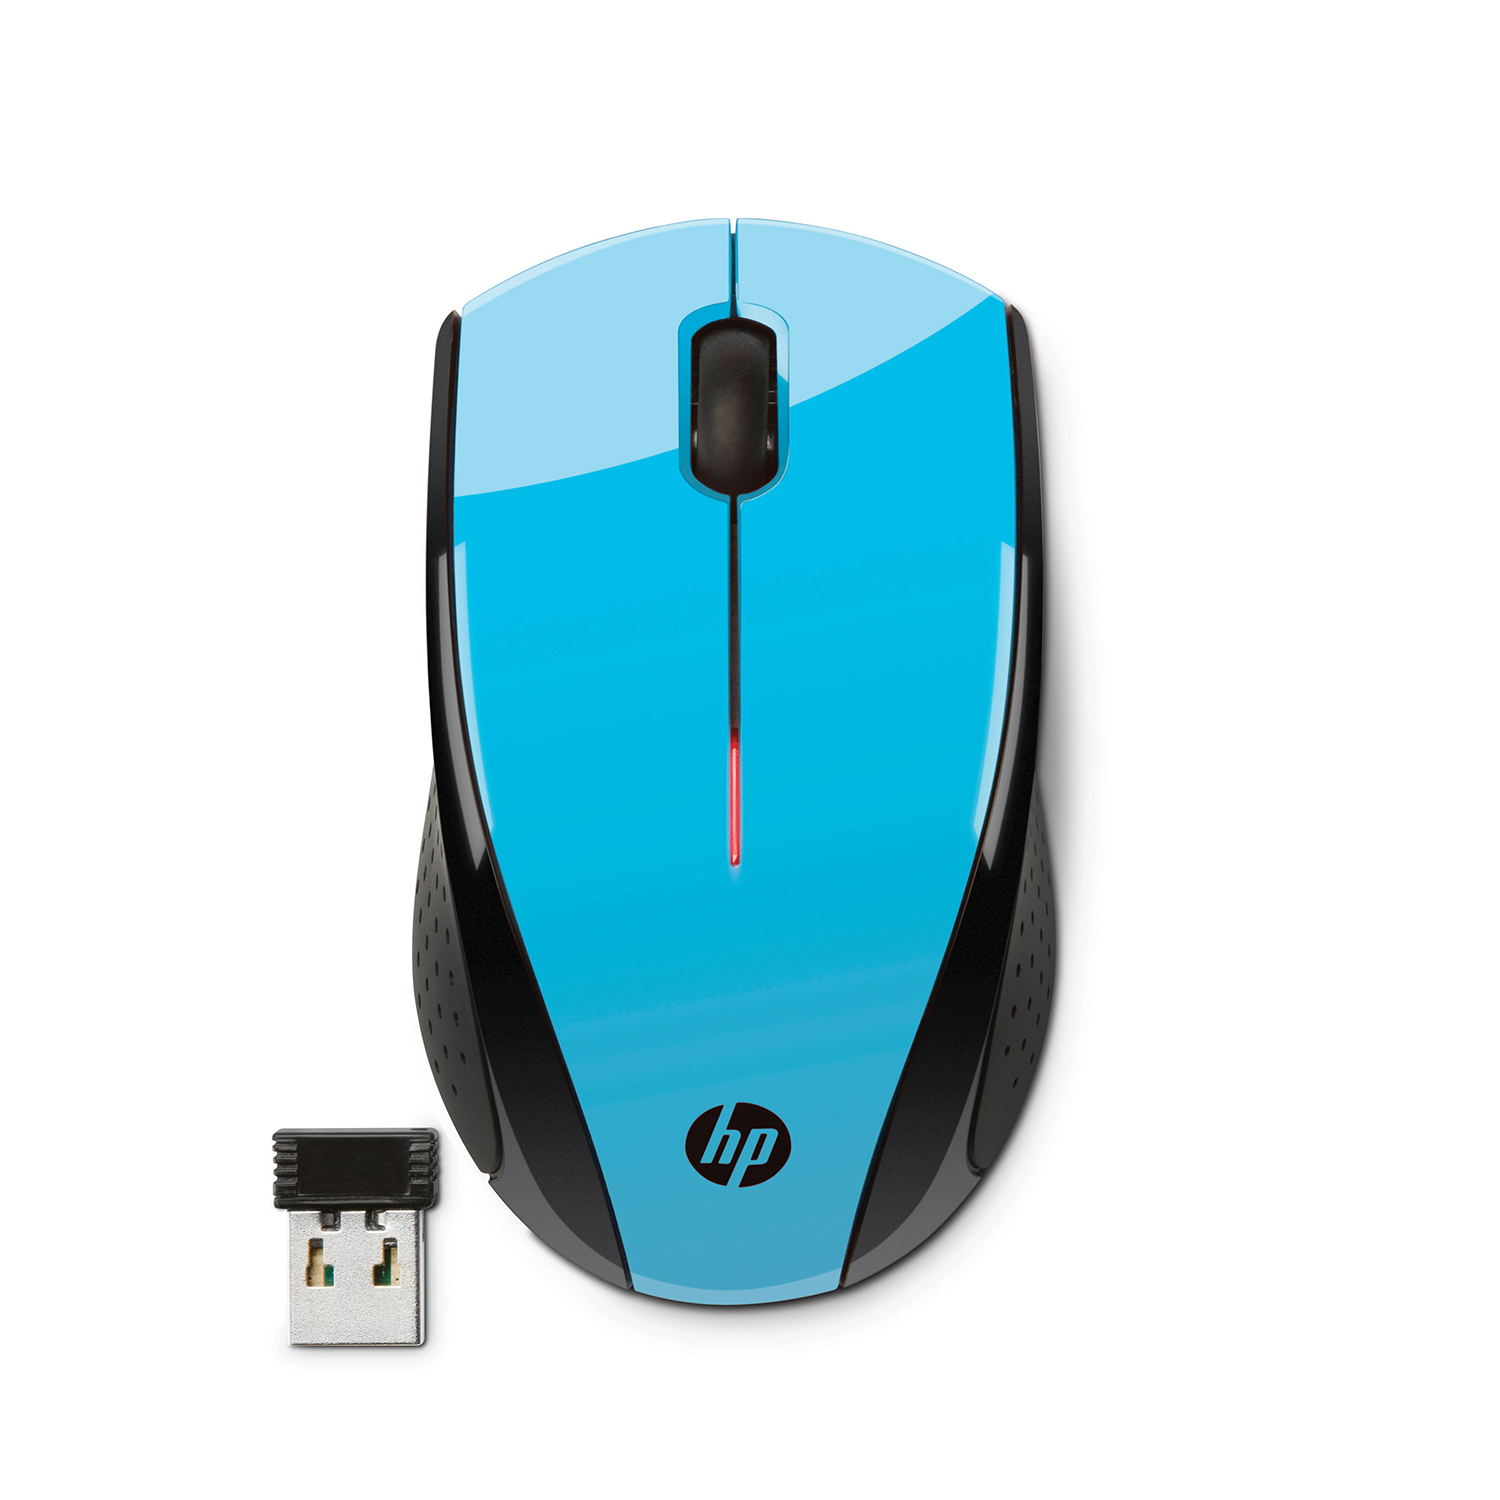 replacing the battery on an hp wireless mouse x3000